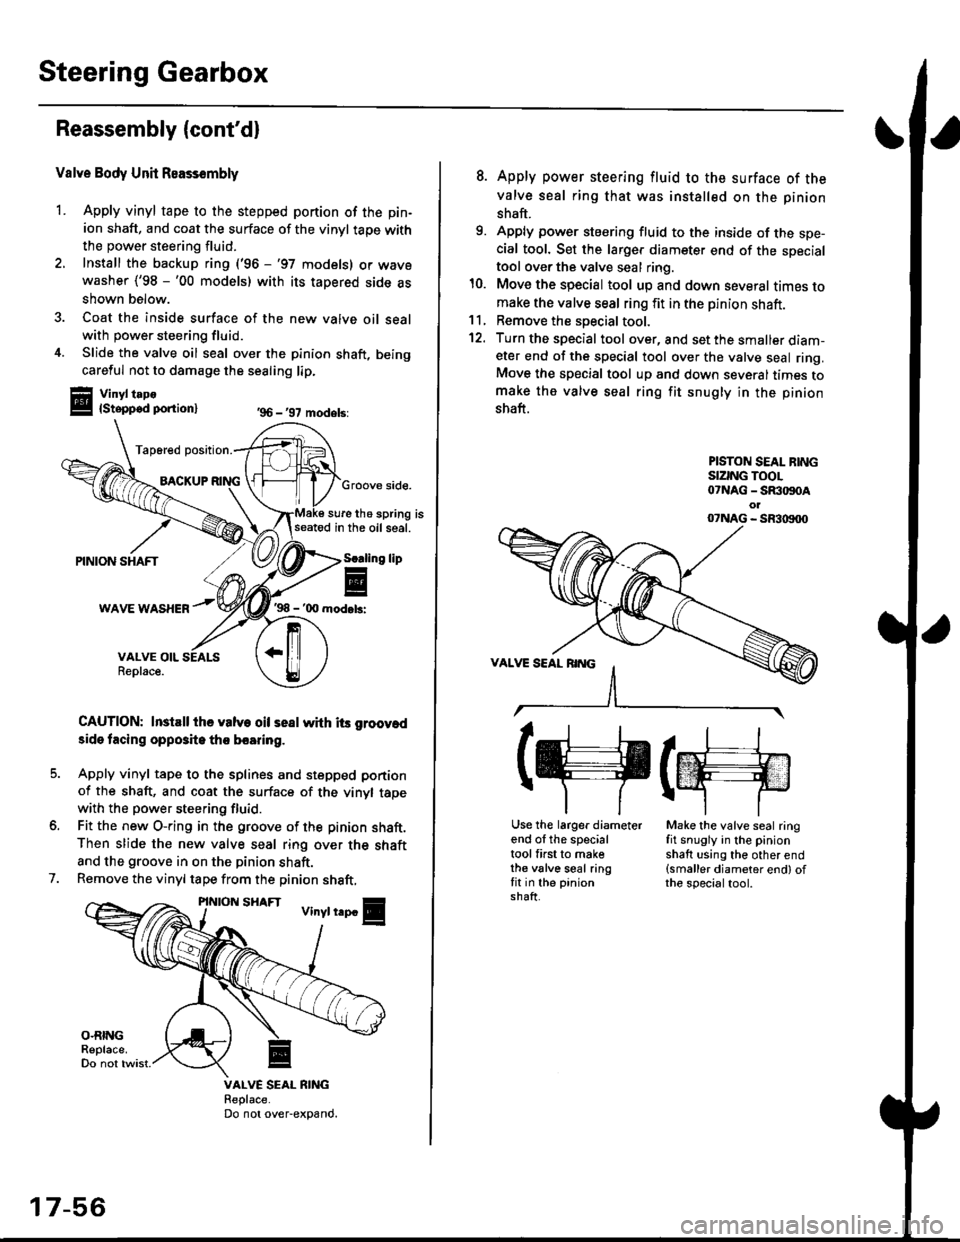 HONDA CIVIC 1996 6.G Owners Guide Steering Gearbox
Reassembly (contd)
Valve Body Unit Reassembly
1. Apply vinyl tape to the stepped portion of the pin-
ion shaft, and coat the surface of the vinyl taoe with
the power steering fluid.
